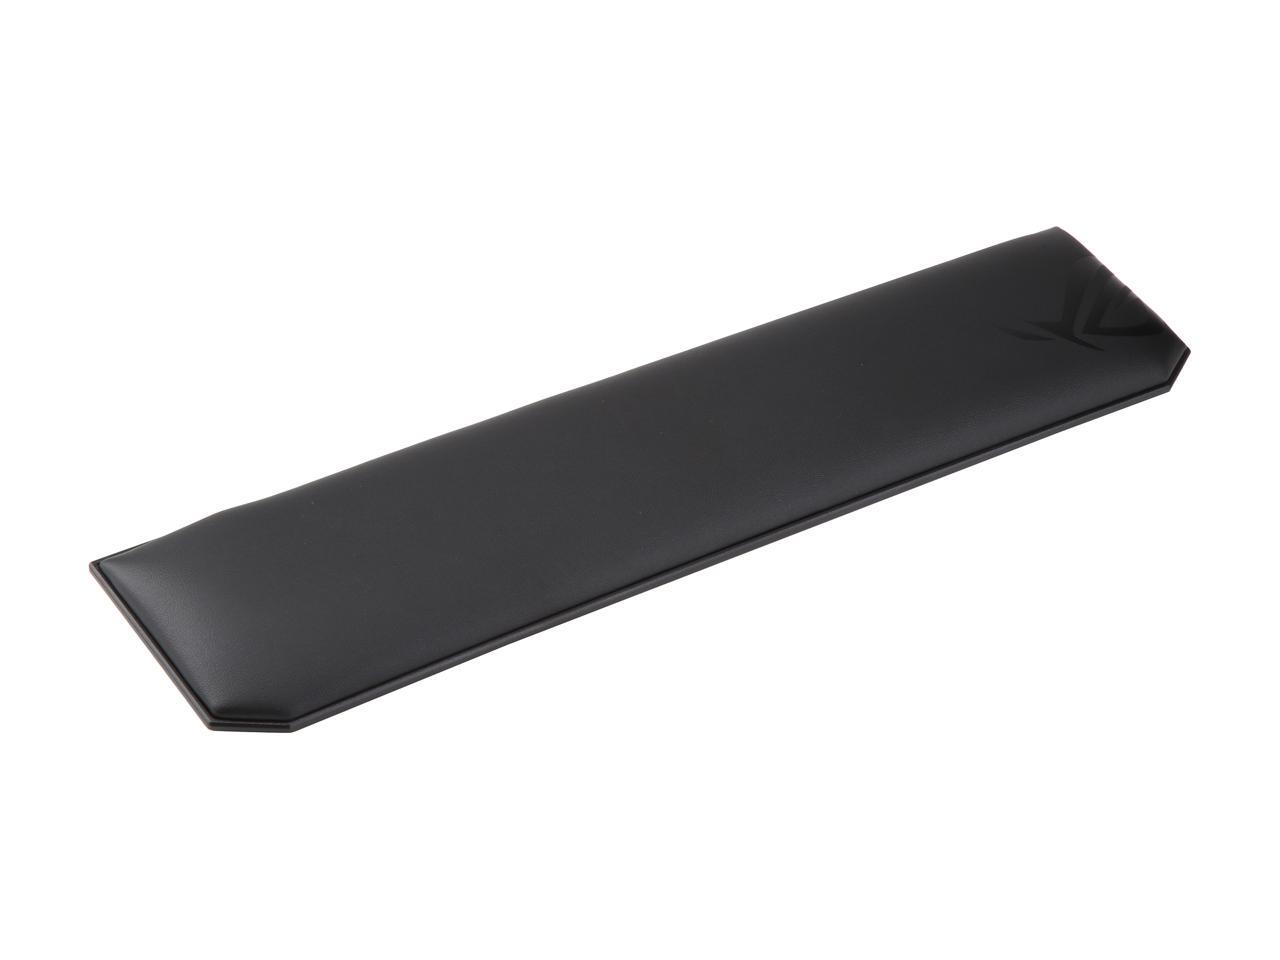 ASUS ROG Gaming Wrist Rest for ROG Claymore Gaming Keyboards with Cushioned Foam core, Leatherette Cover and Non-slip Rubber Feet